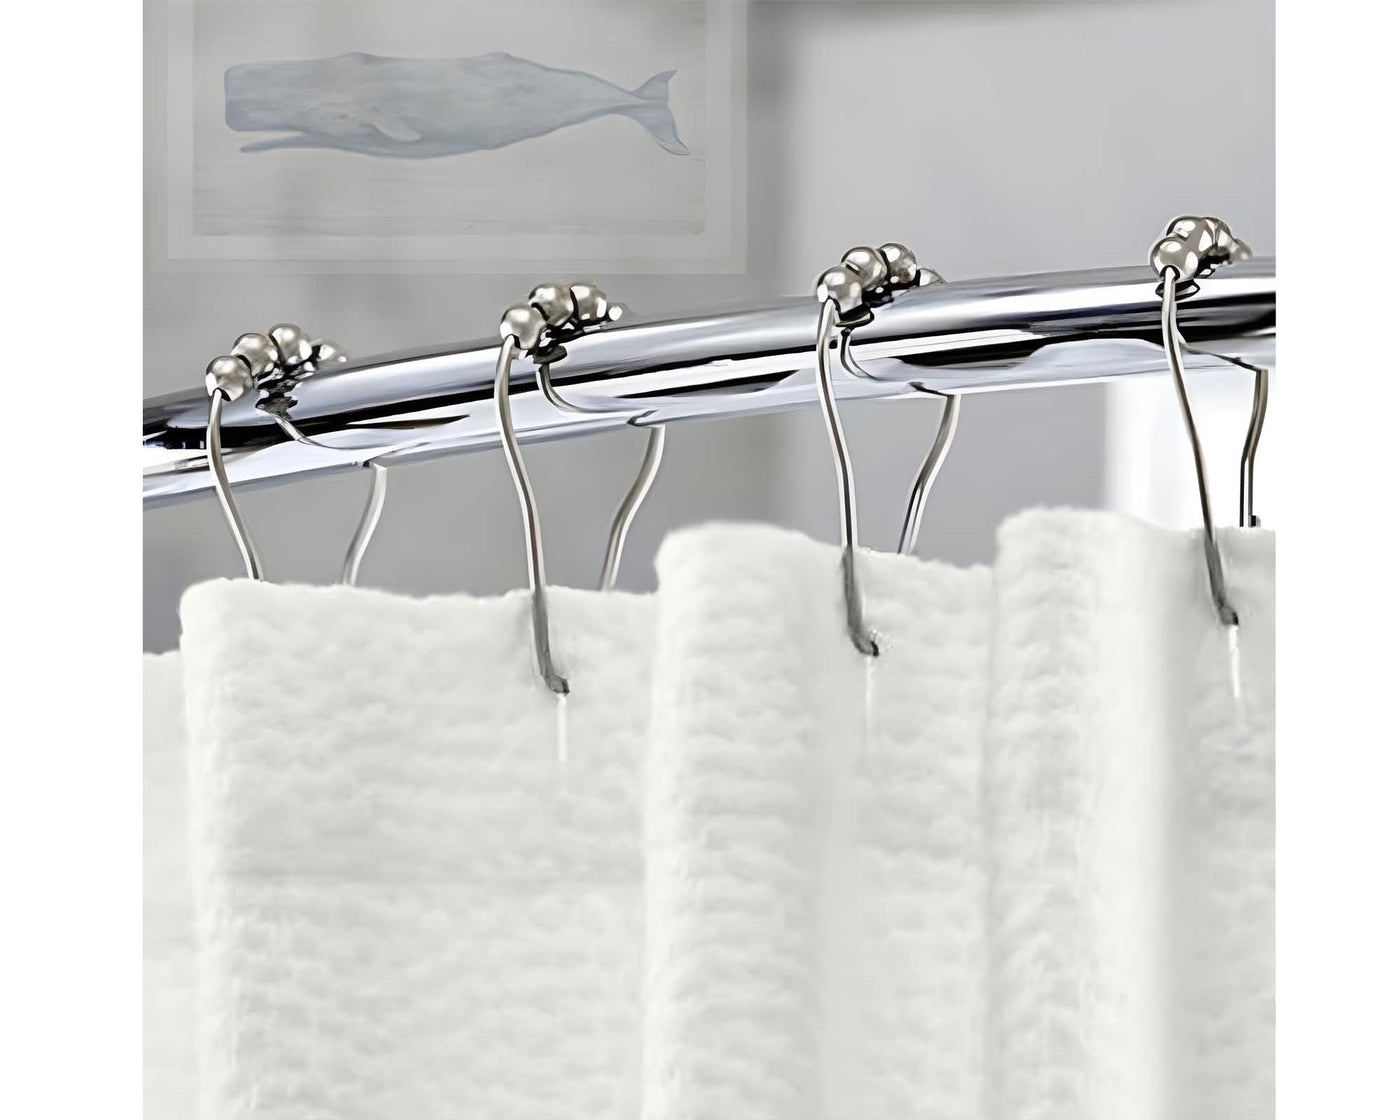 Ball bearing shower curtain hooks in lifestyle photo